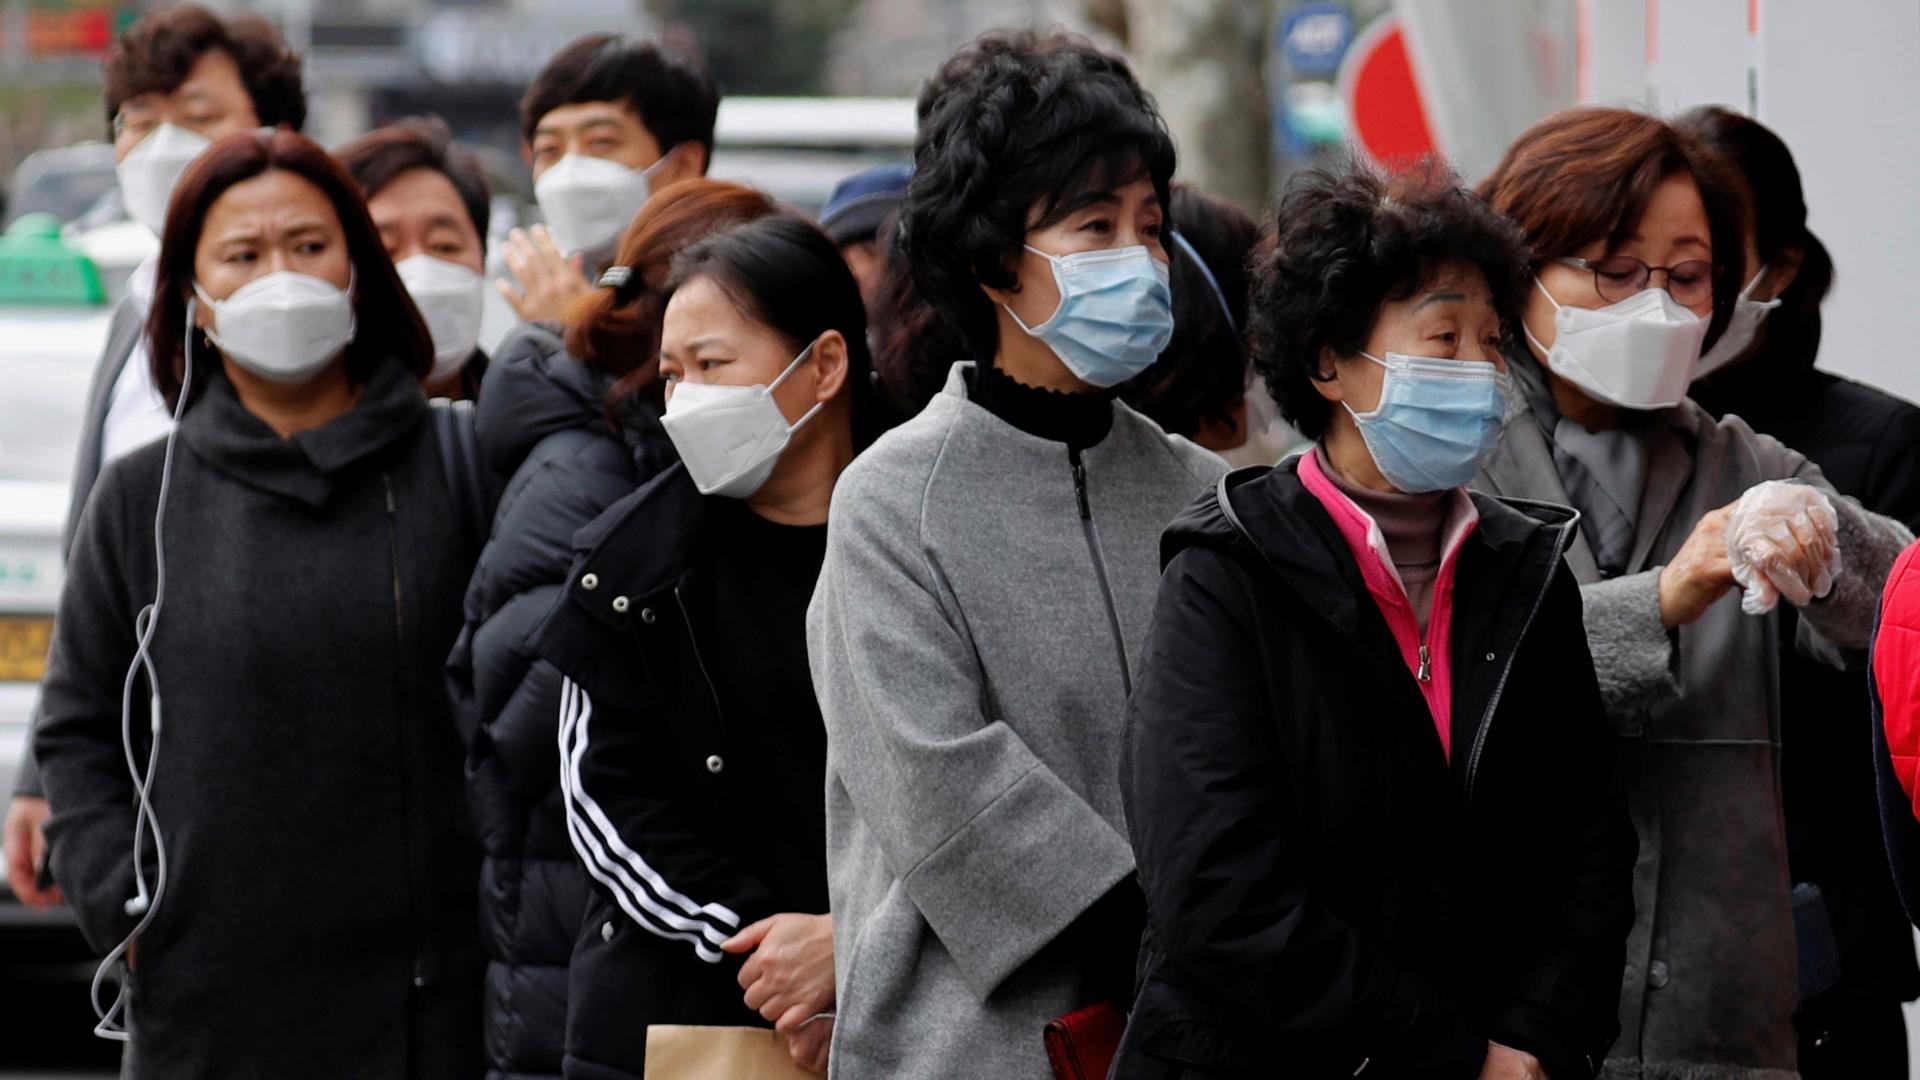 People wearing masks stand in a line to buy face masks in front of a drug store amid the rise in confirmed cases of the novel coronavirus disease of COVID-19 in Daegu, South Korea, March 3, 2020. 